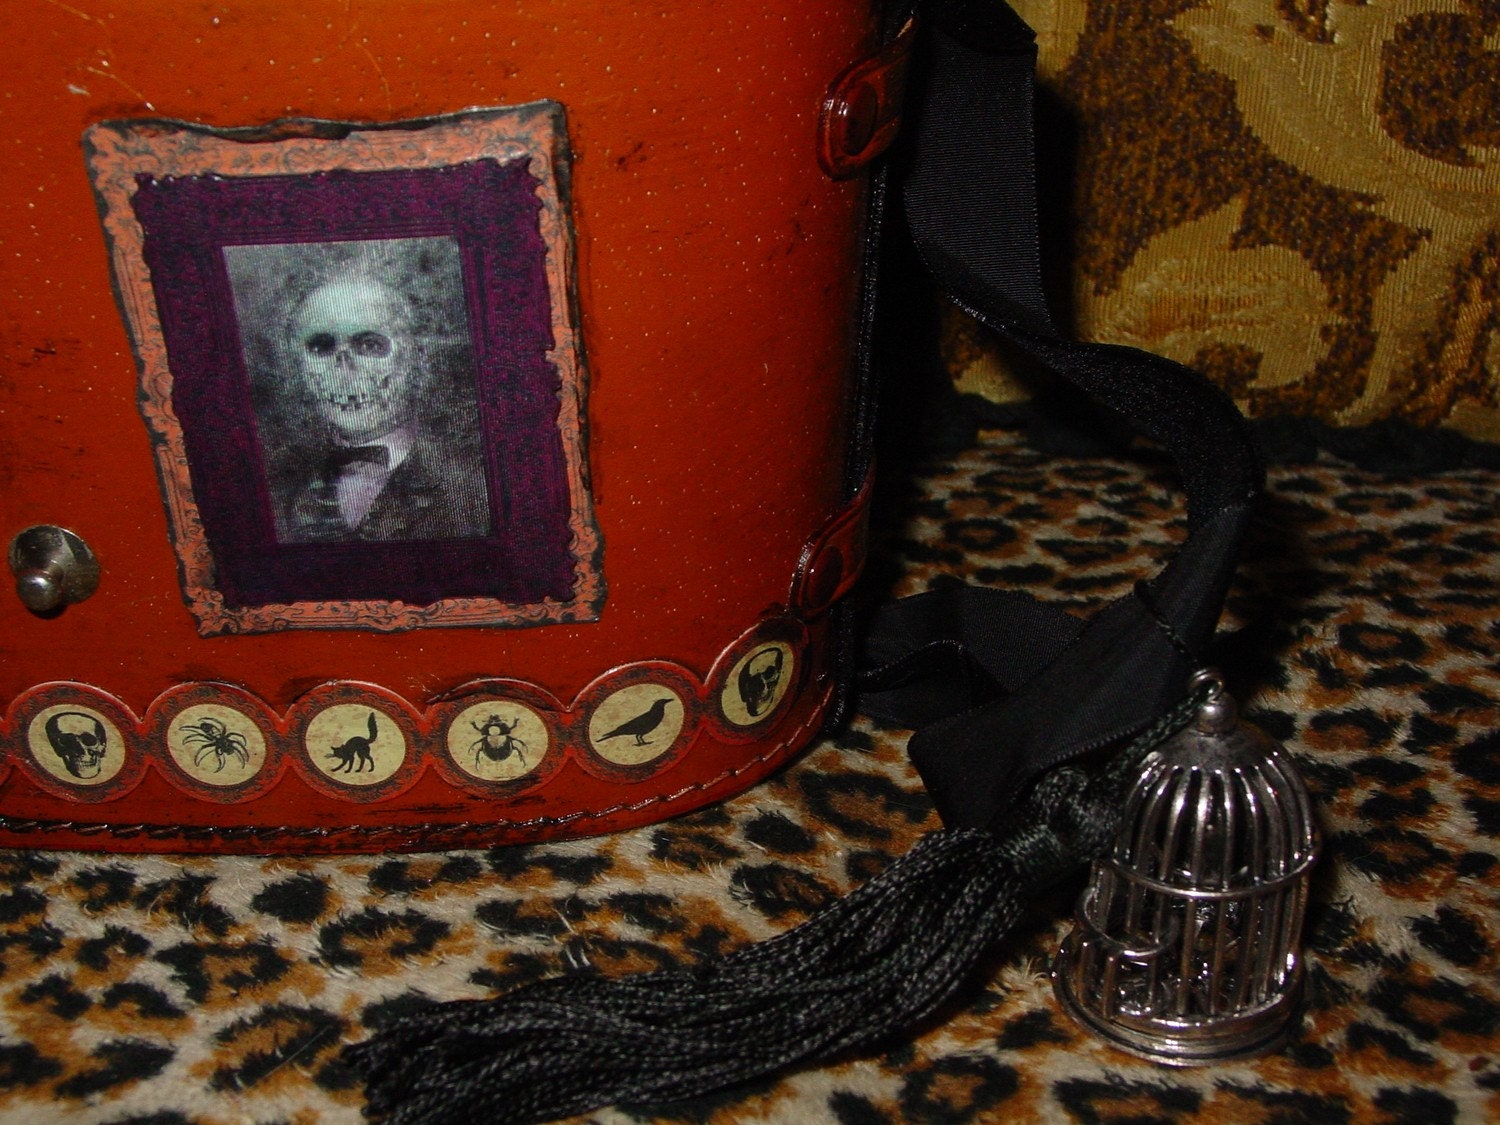 HALLOWEEN Gothic  vintage purse by  C. Reinke with holograph  and other spooky portrait  great TAROT CASE